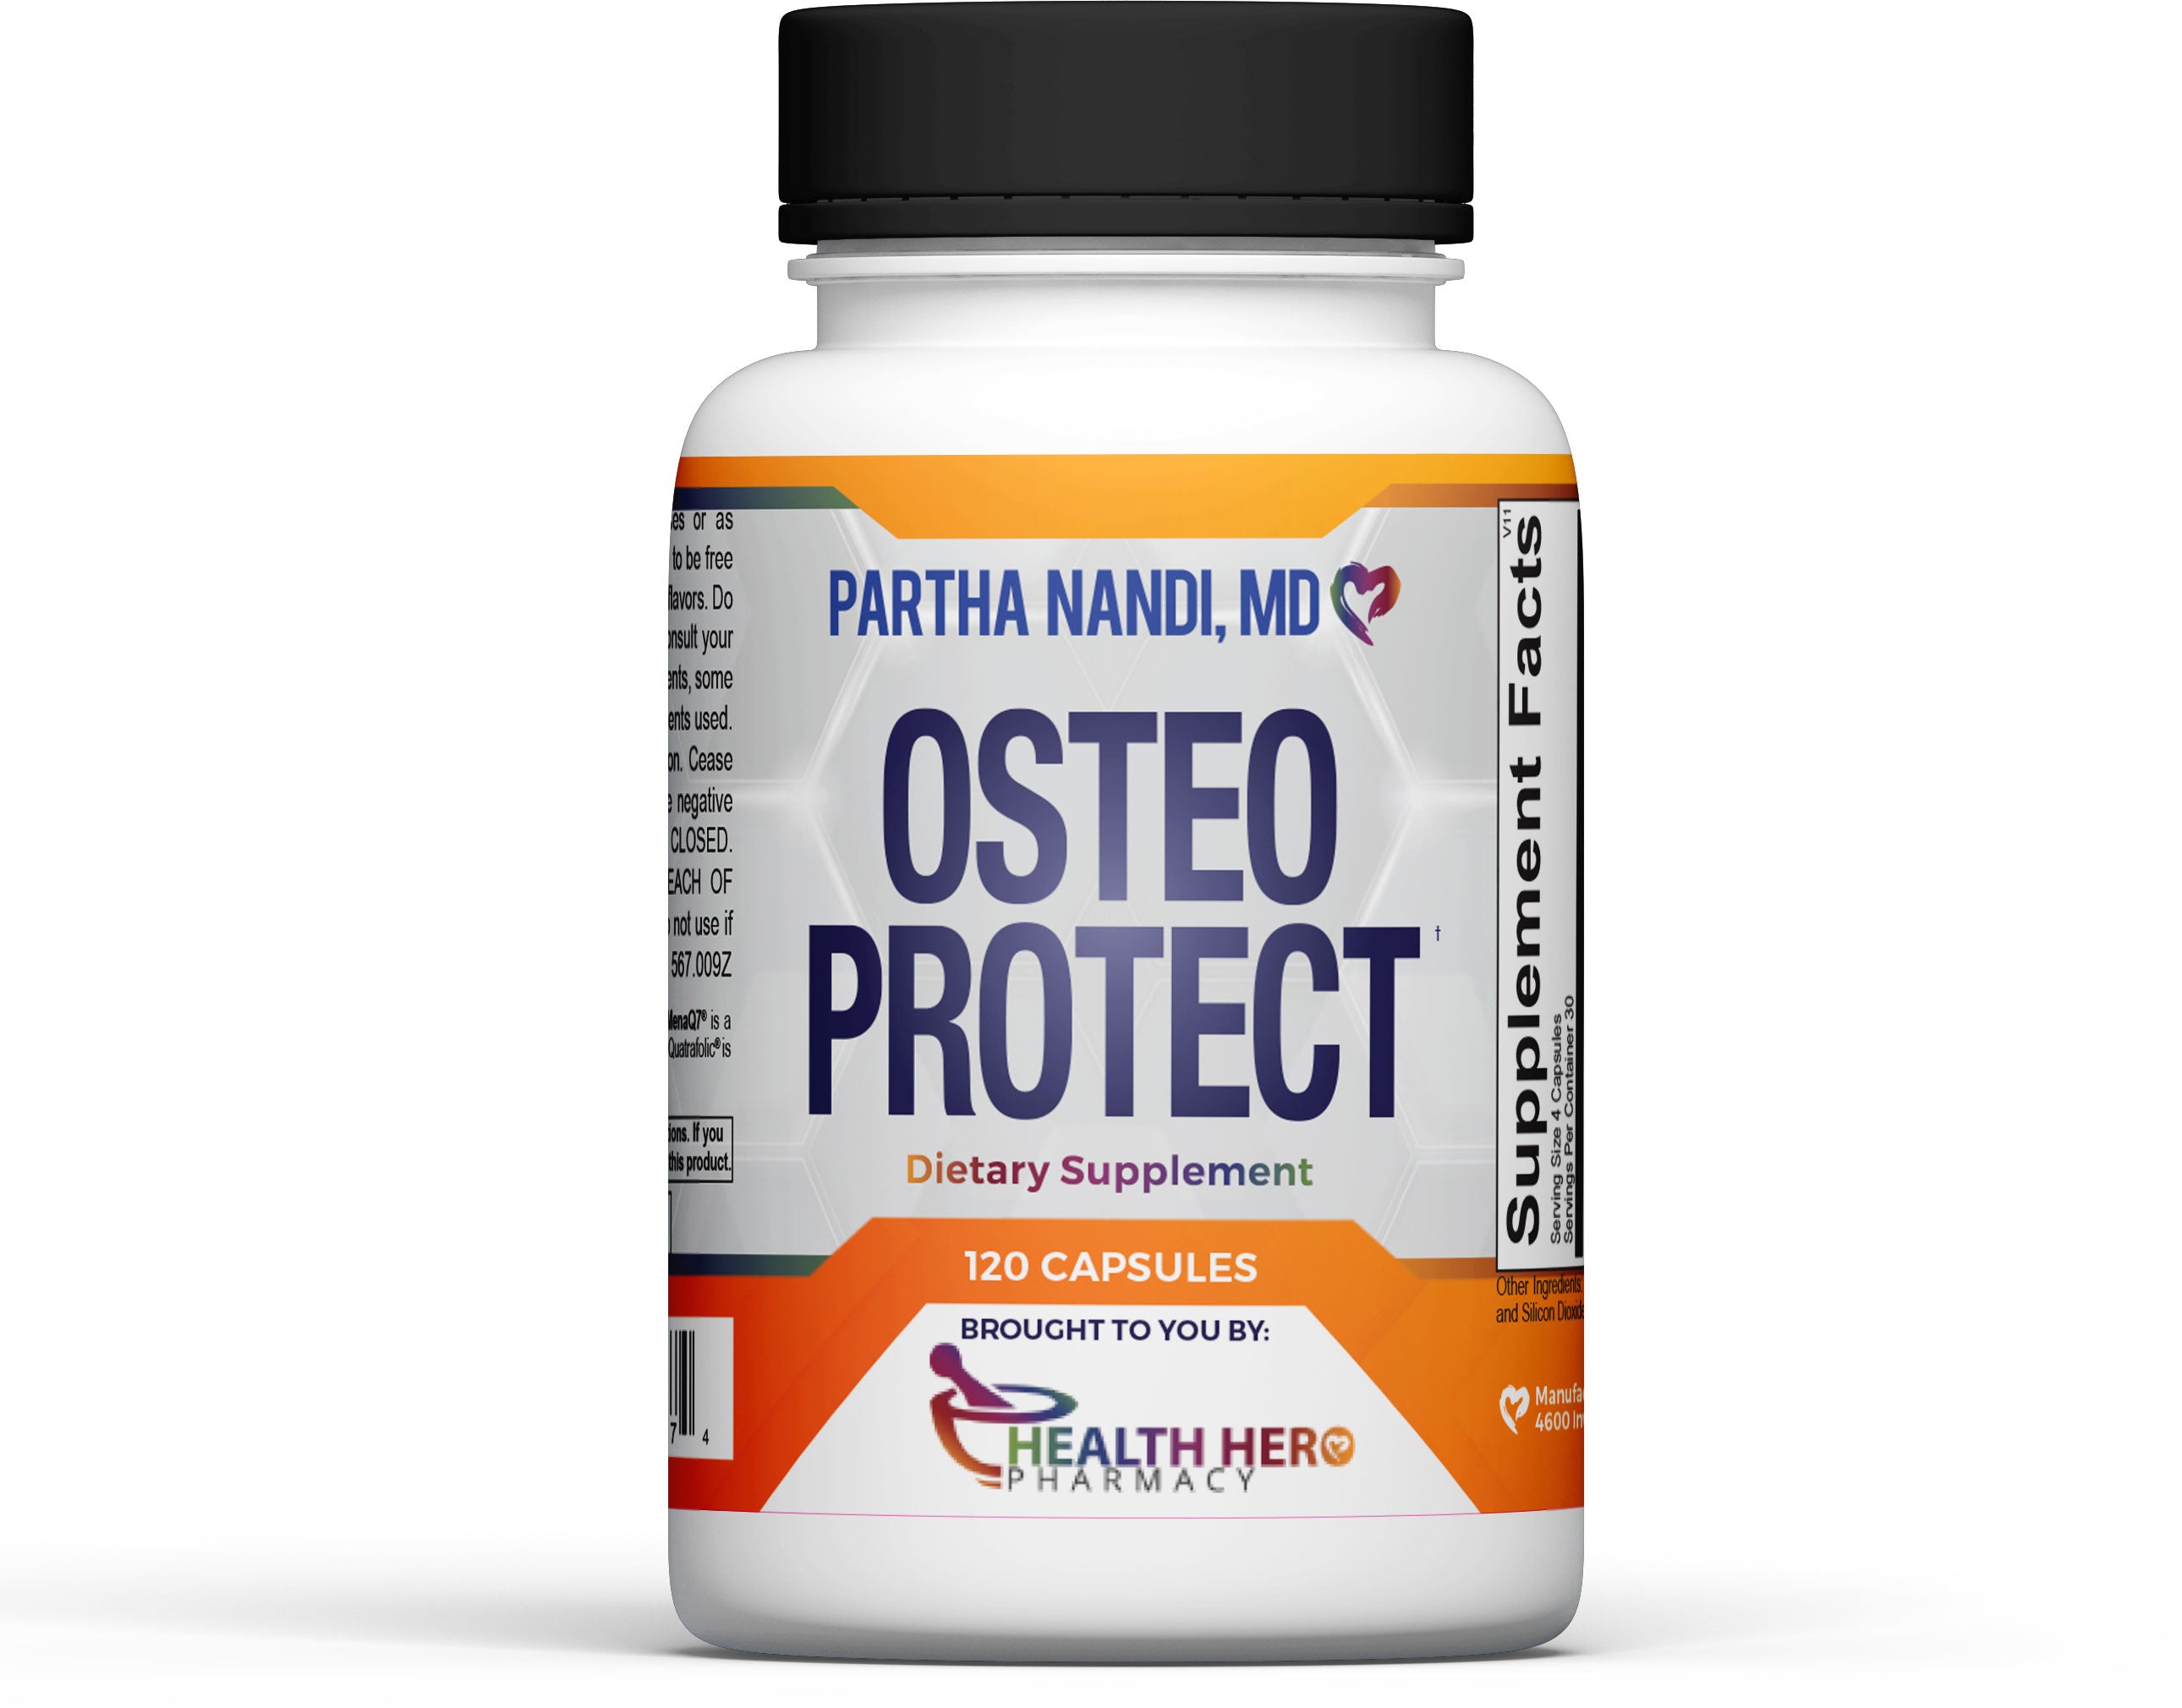 OsteoProtect